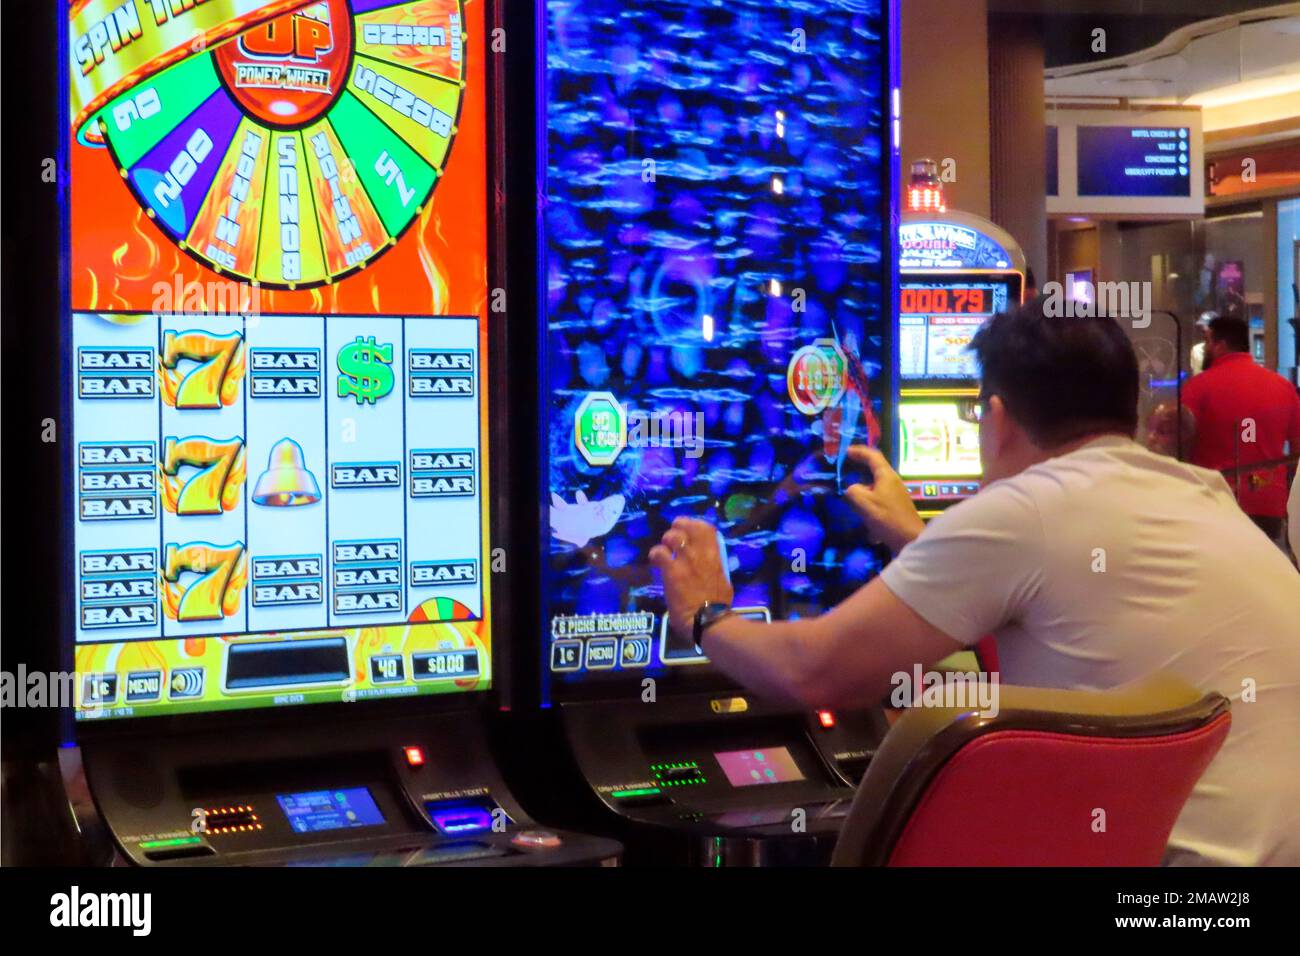 A gambler plays a slot machine at the Hard Rock casino in Atlantic City,  N.J. on Aug. 8, 2022. Figures released by New Jersey gambling regulators on  Tuesday, Aug. 16, 2022 show